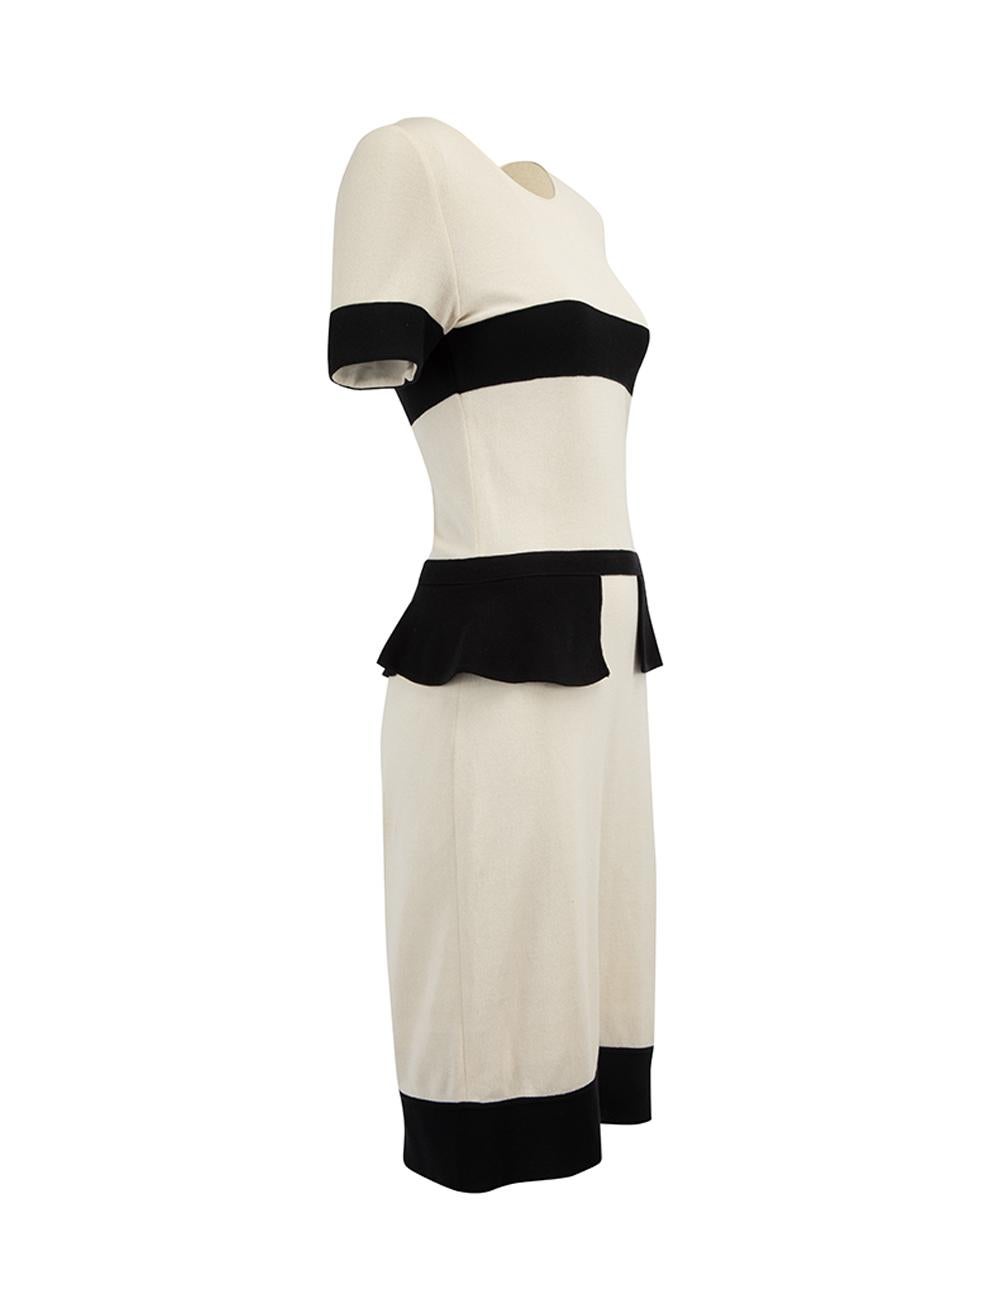 CONDITION is Very good. Minimal wear to dress is evident. Minimal wear around the right shoulder where some faint marks can be seen on this used Giambattista Valli designer resale item. Details Cream and black Cotton Midi dress Short sleeves Black